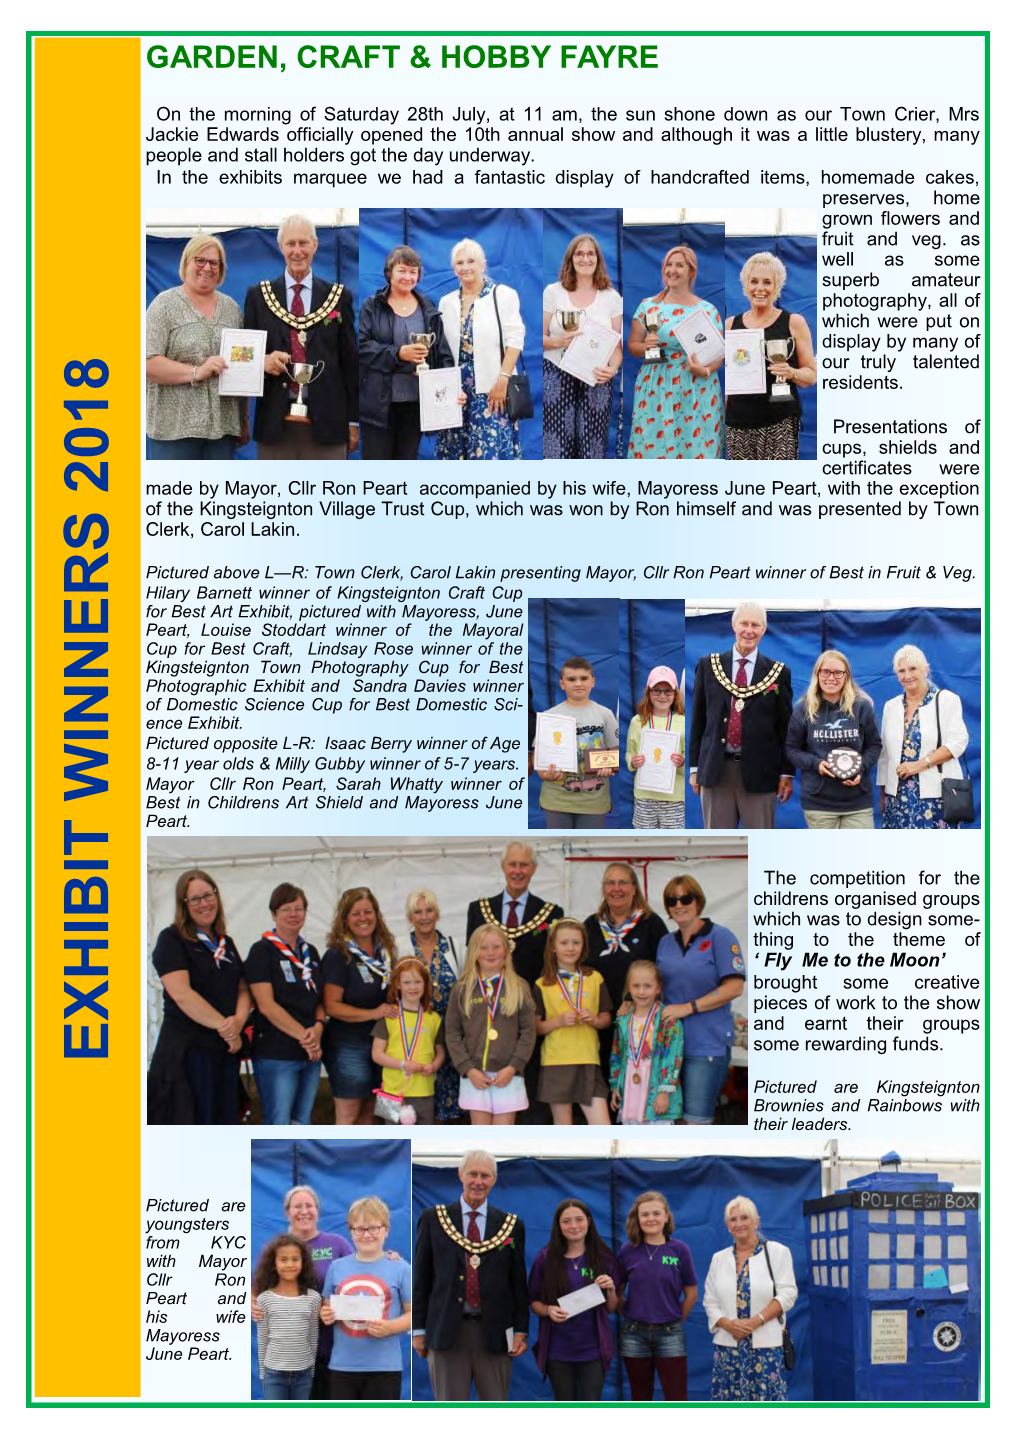 EXHIBIT WINNERS 2018 Pictured Are Kingsteignton Brownies and Rainbows with Their Leaders